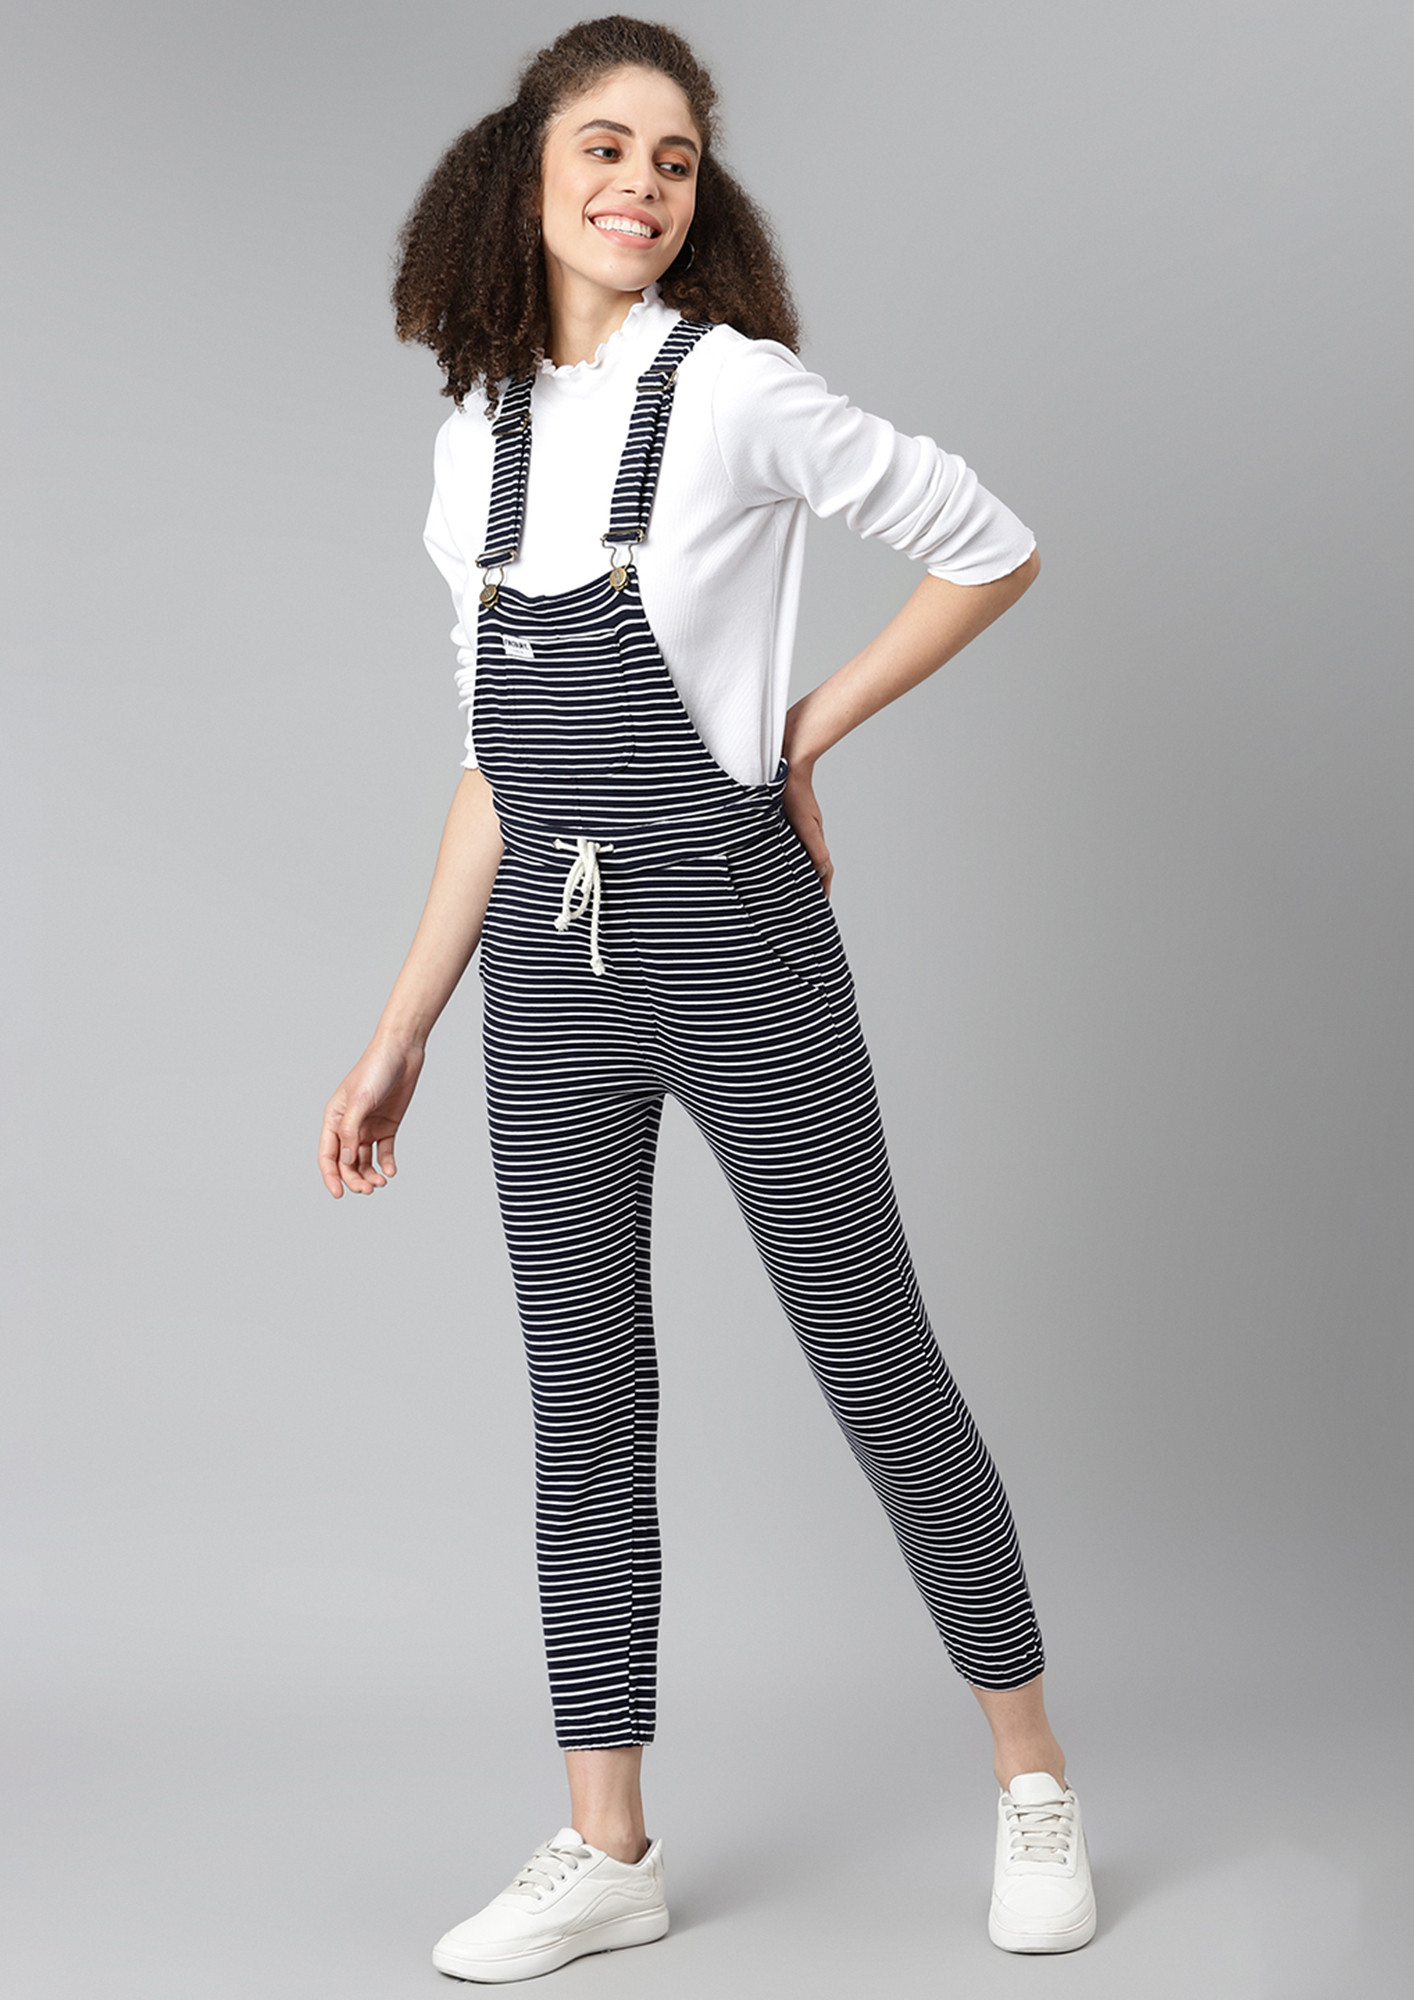 FINSBURY LONDON Women's Stripe Cotton Dungaree with Contrast String